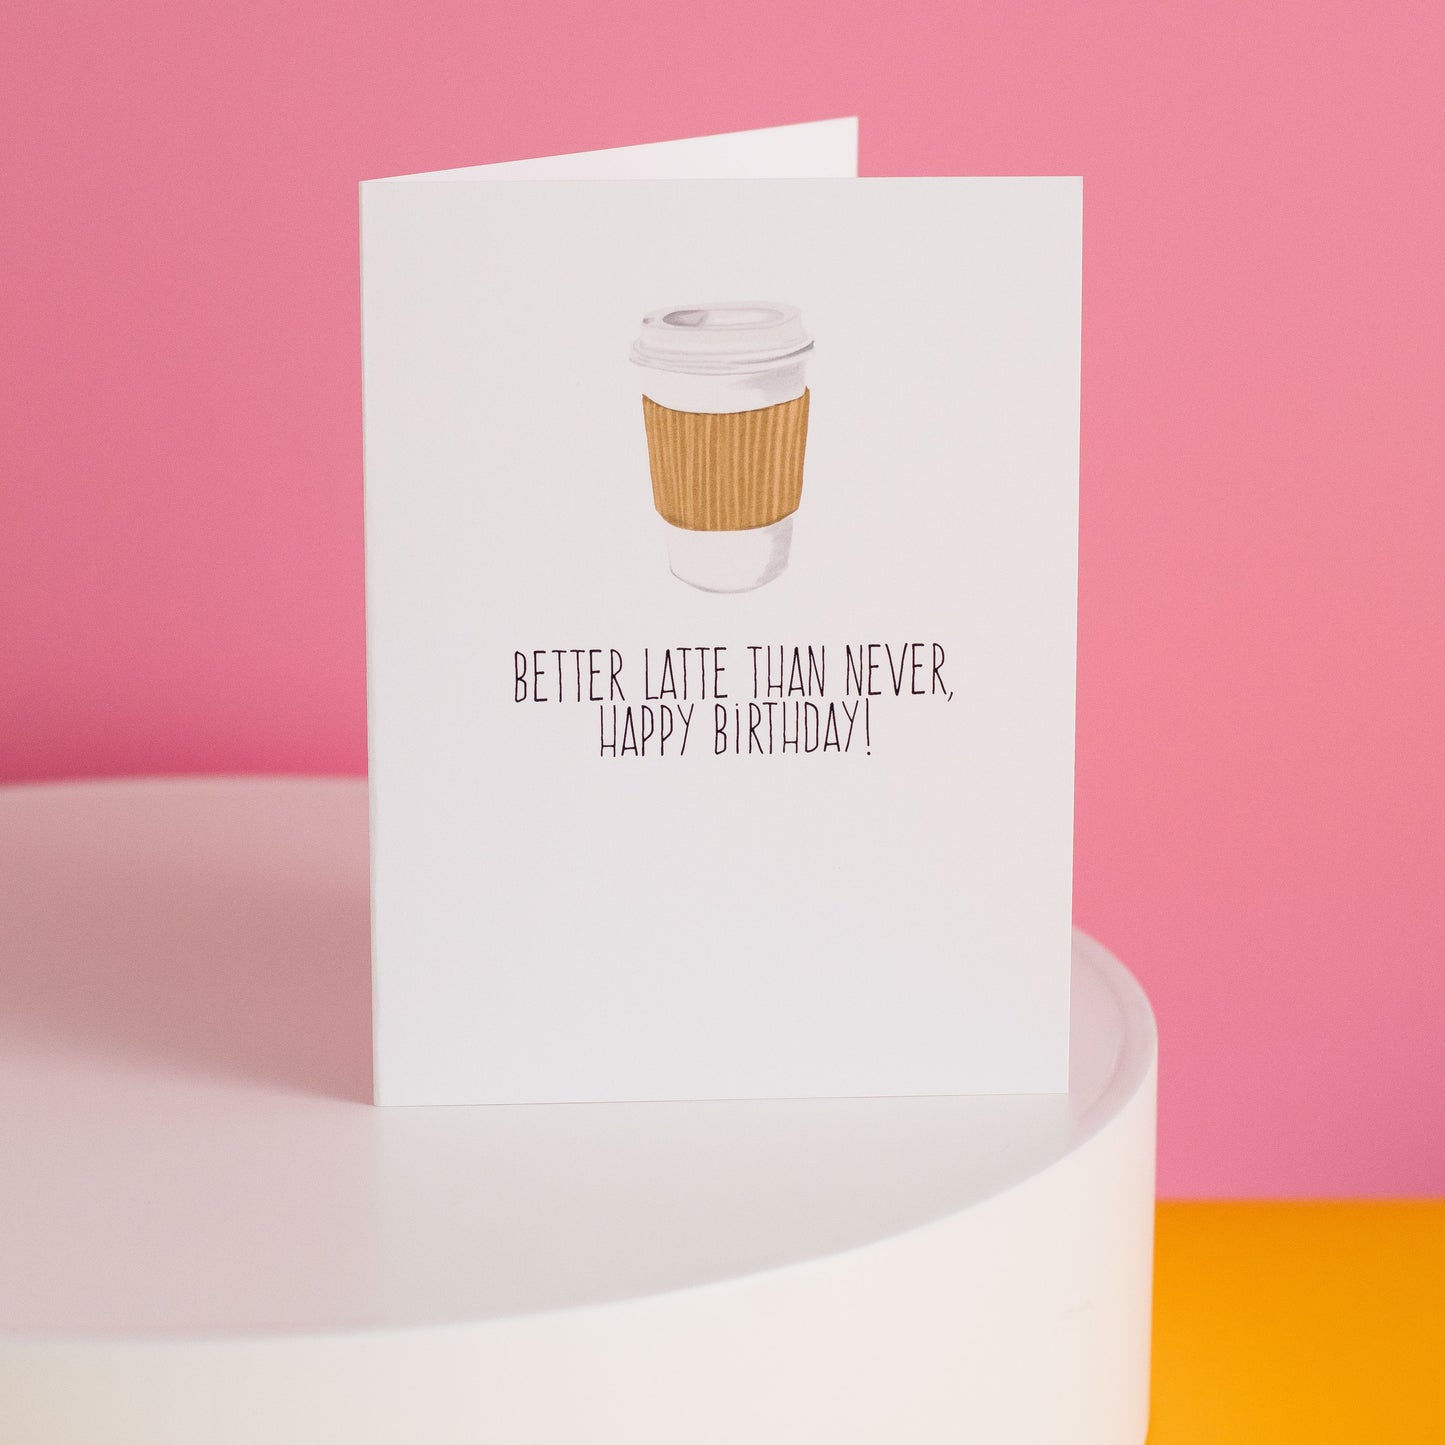 Better Latte Than Never, Happy Birthday! - Greeting Card